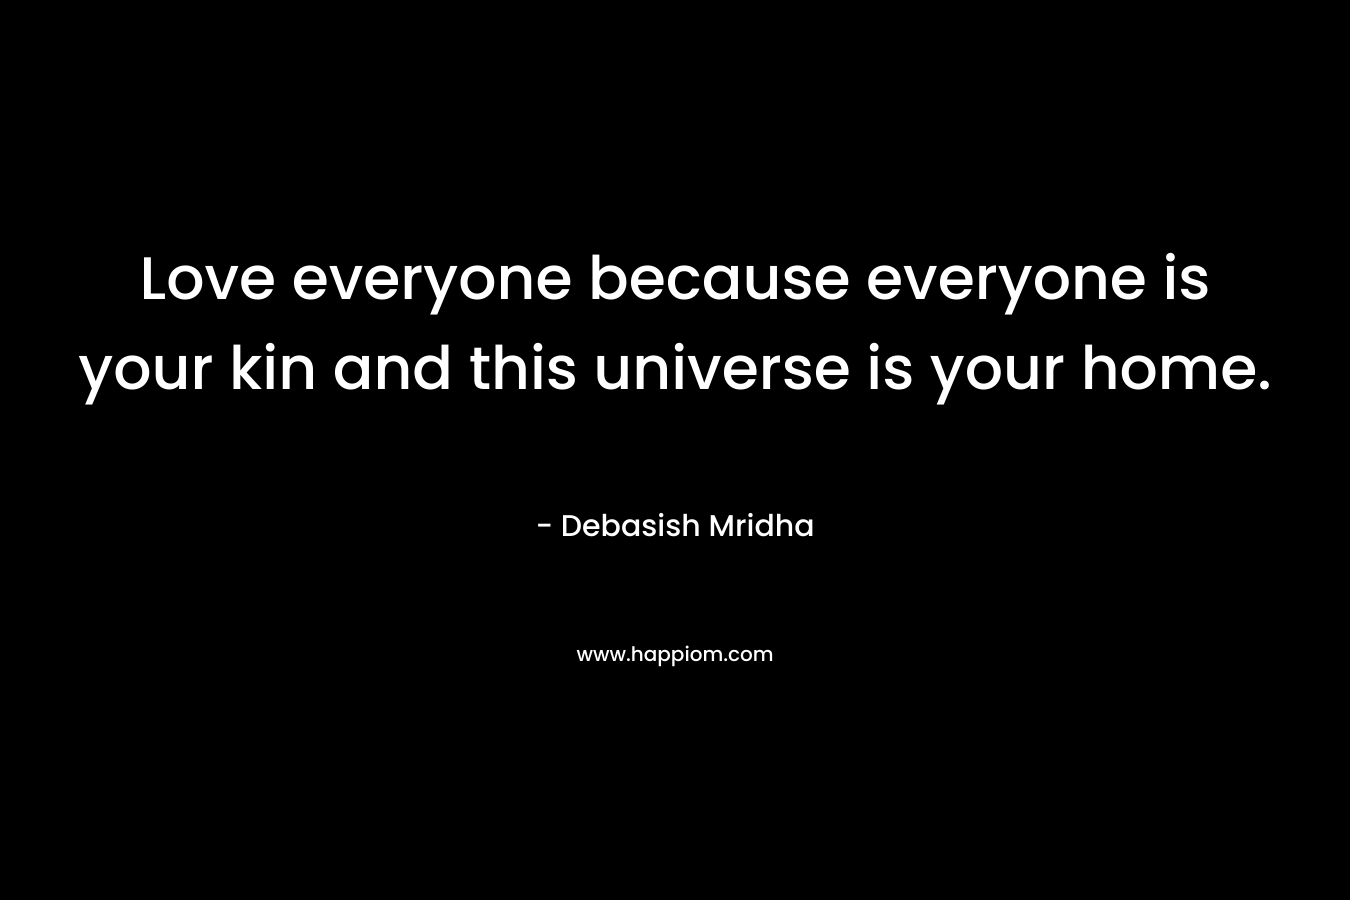 Love everyone because everyone is your kin and this universe is your home.